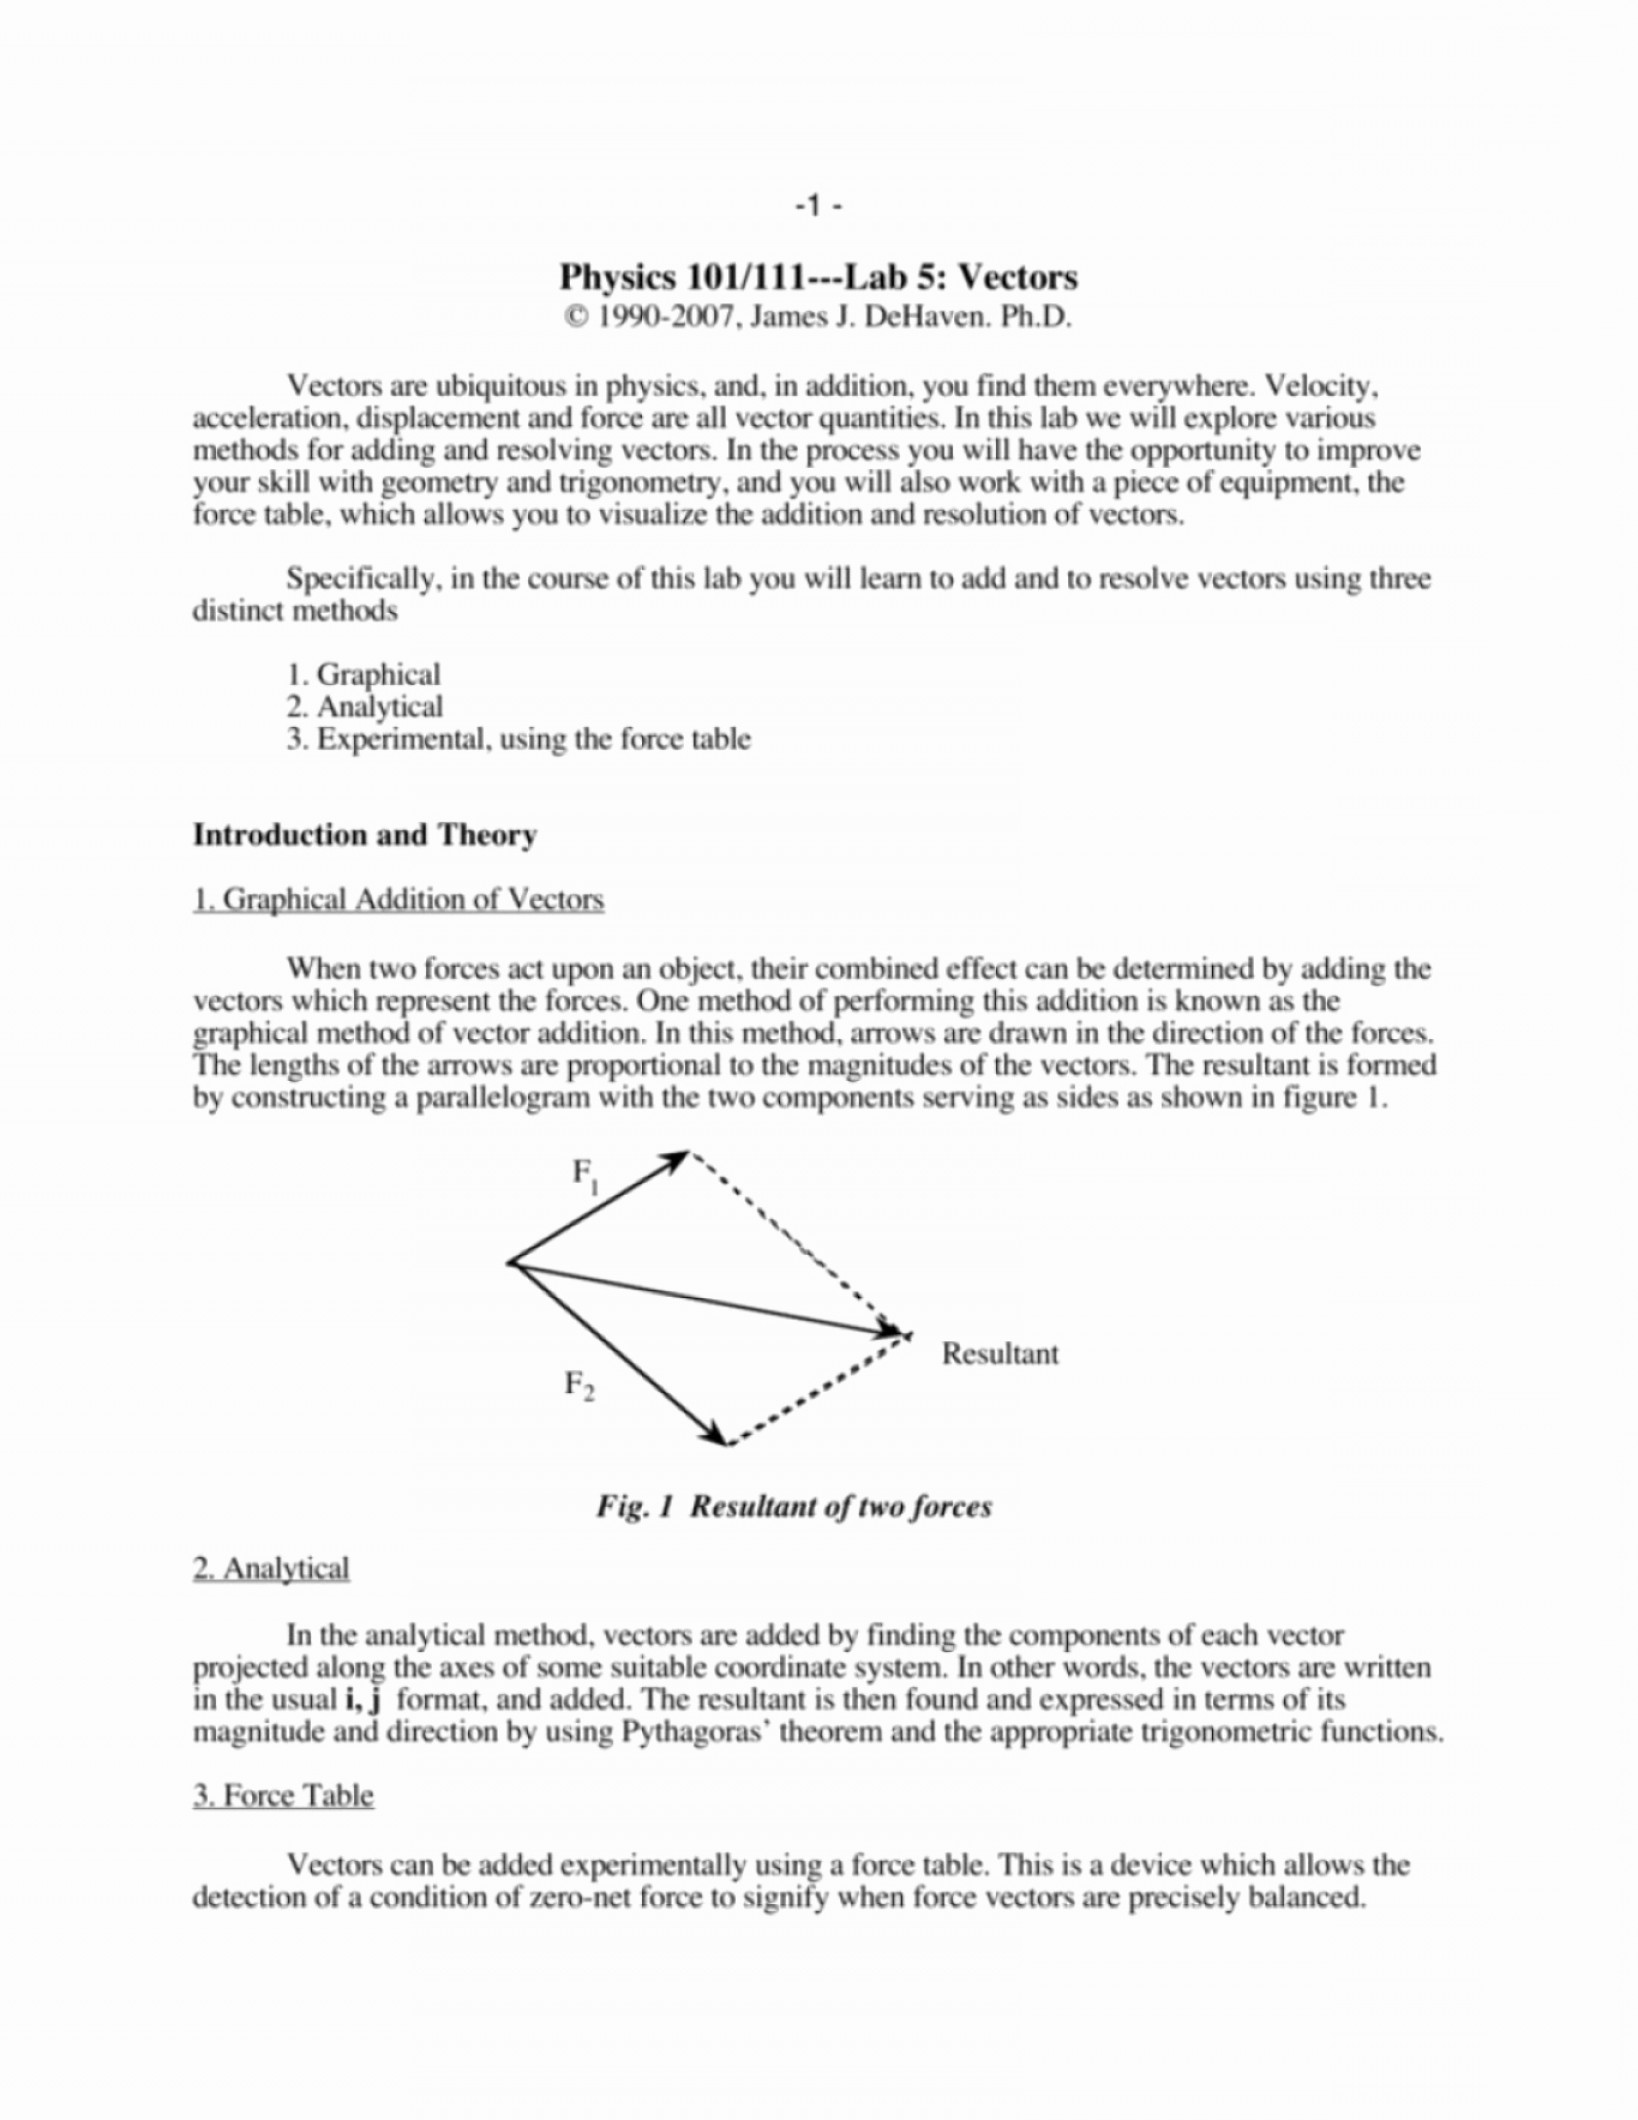 Vector Worksheets With Answers at Vectorified.com | Collection of